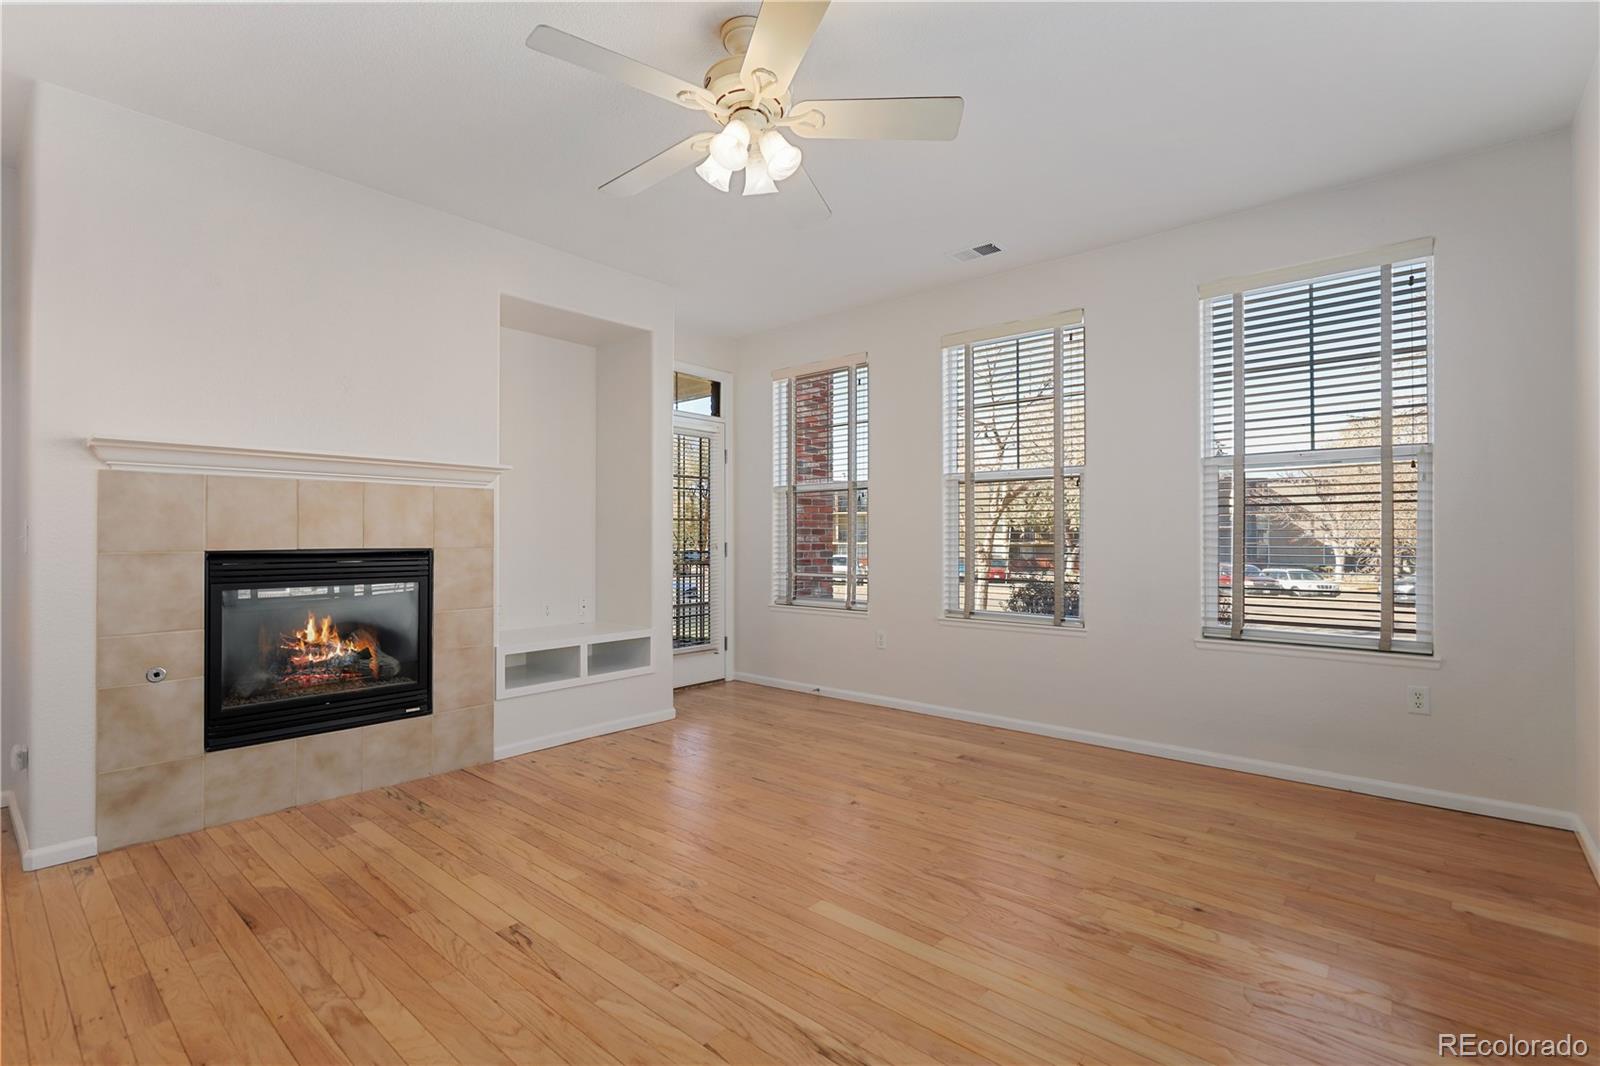 an empty room with windows fireplace and fan